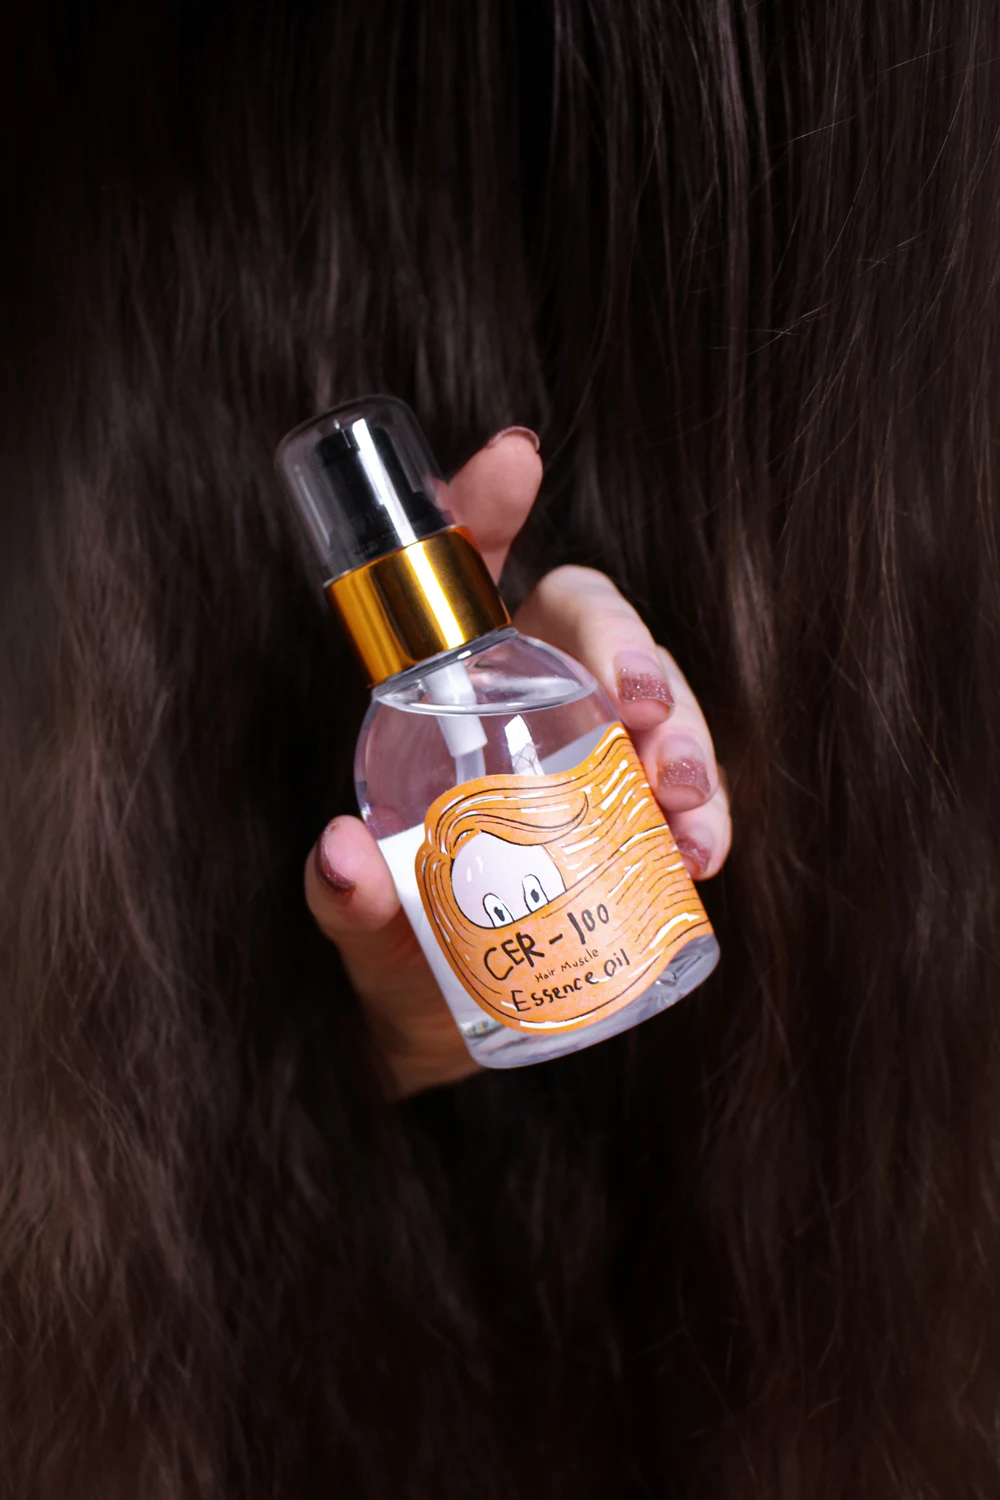 a female hand covered in long, luscious hair holding a tube of cer-100 essence oil by elizavecca